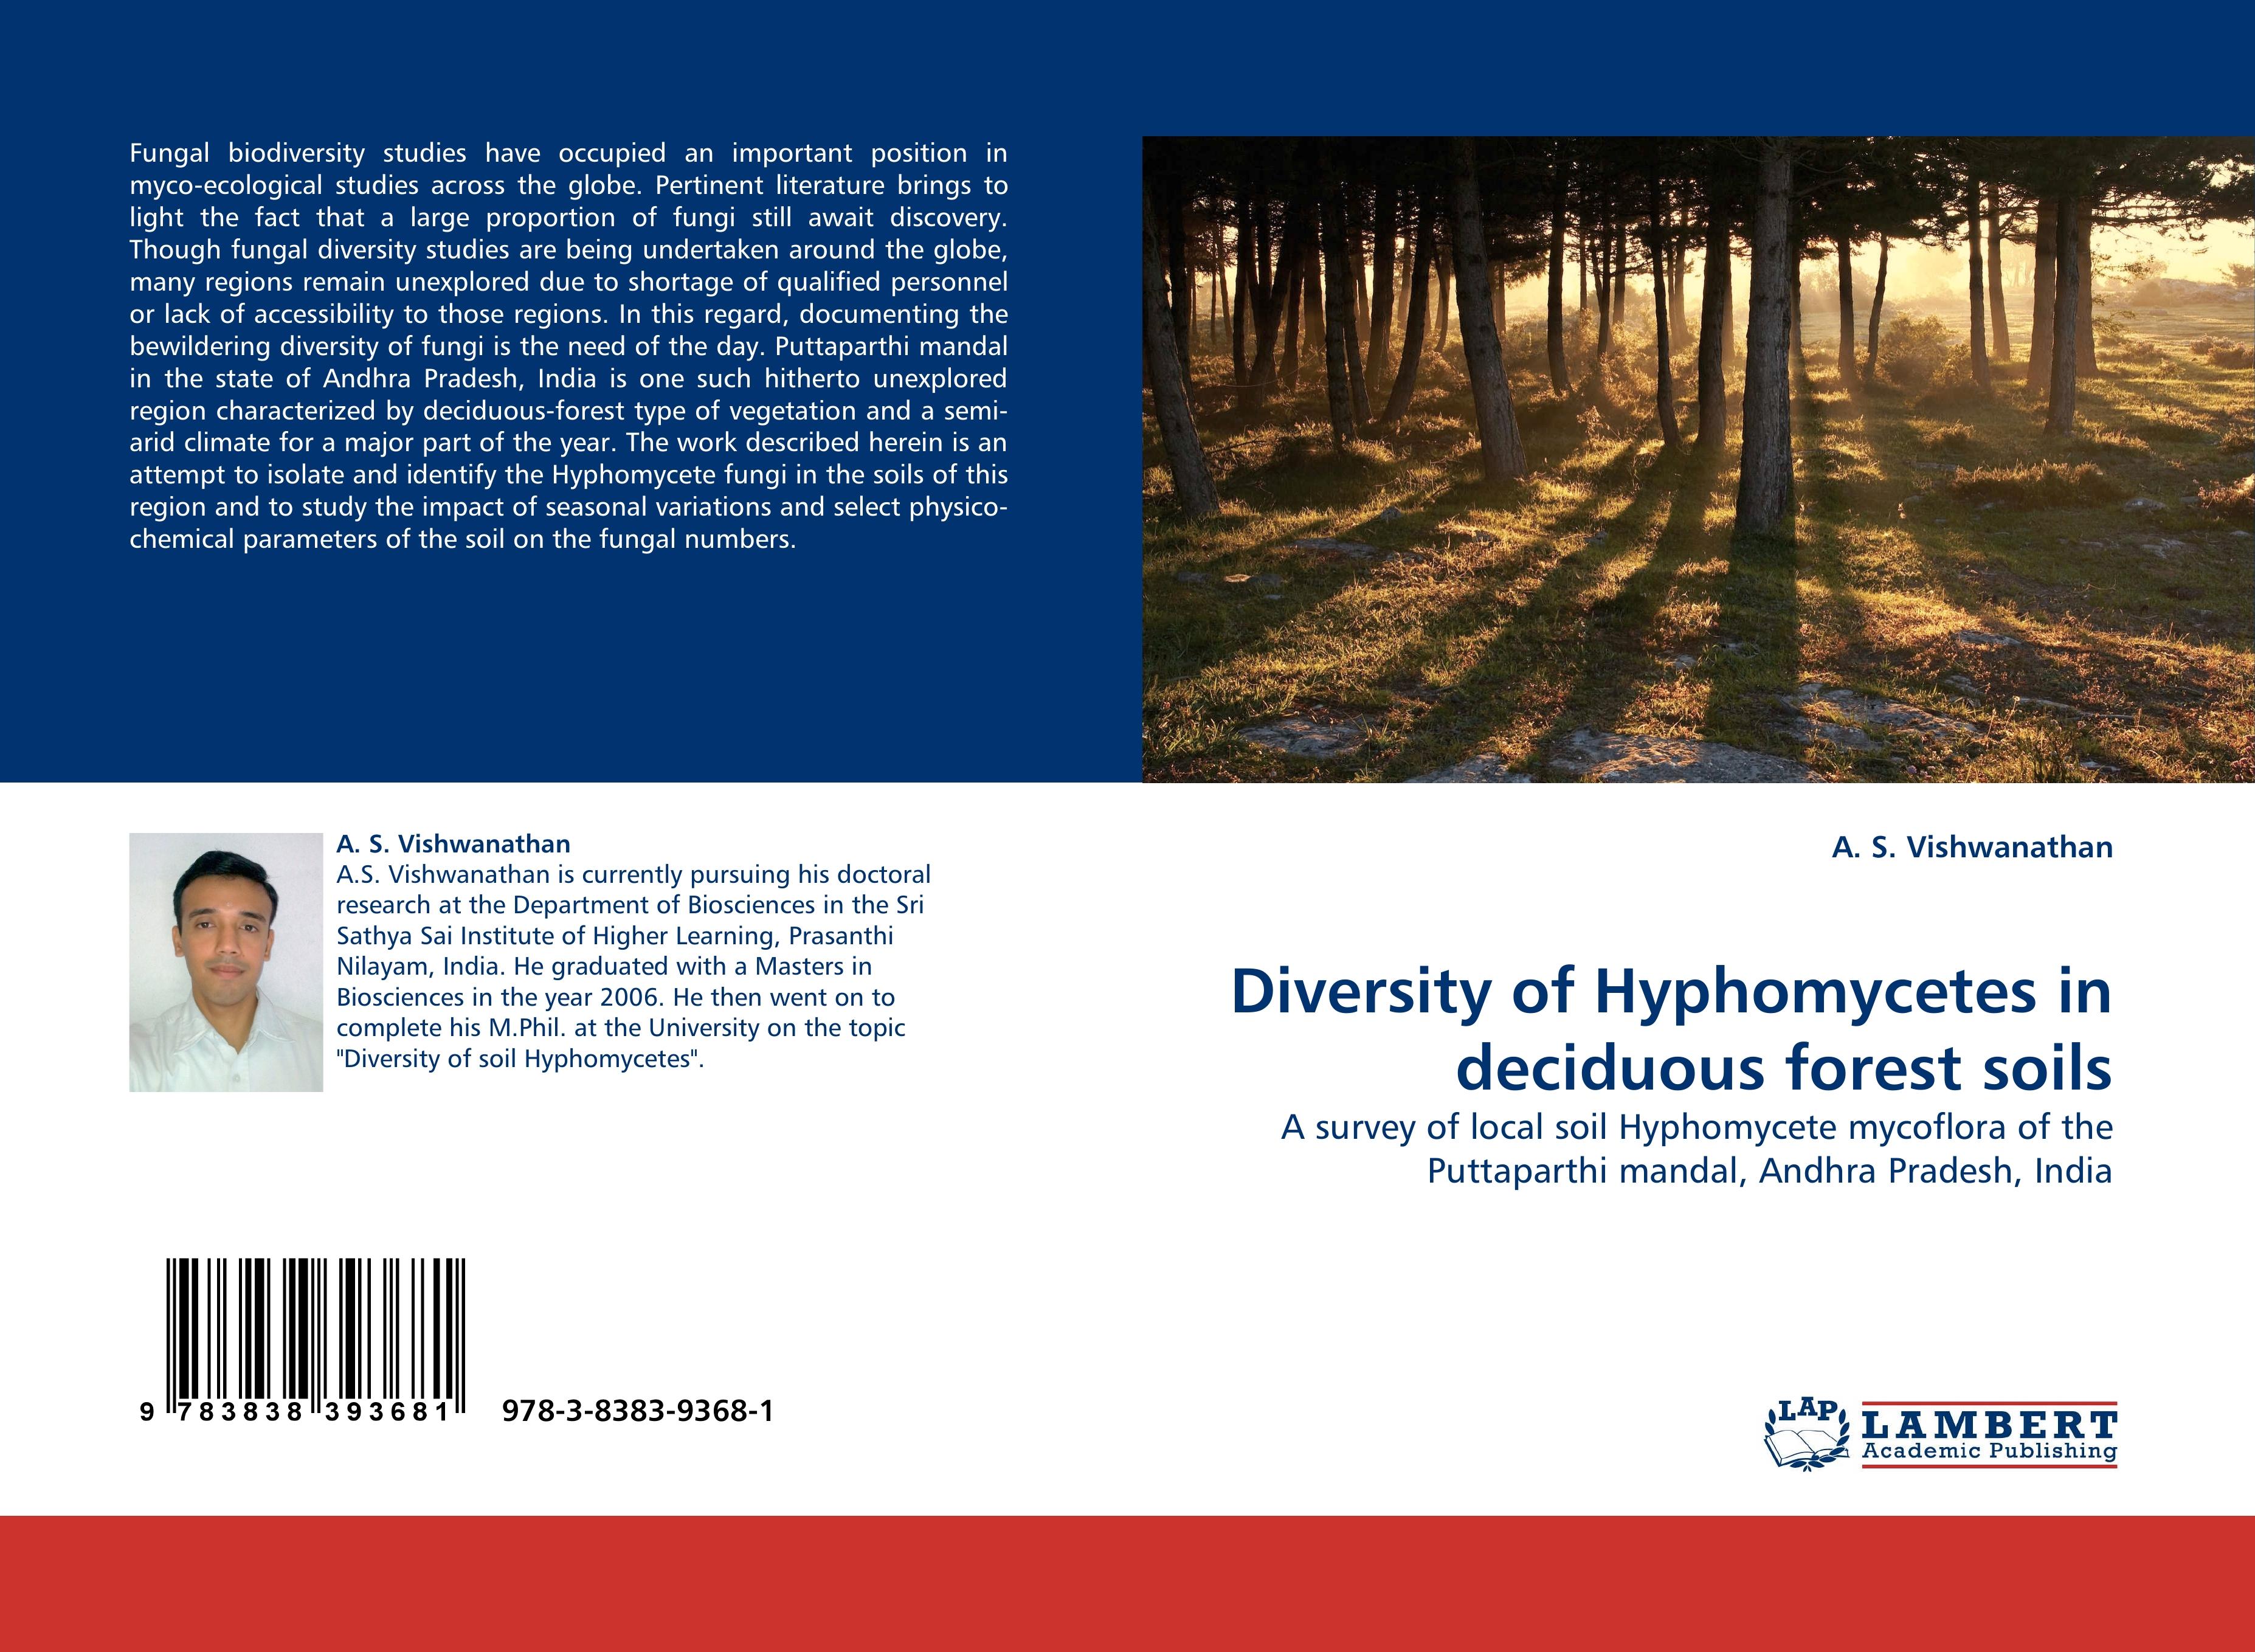 Diversity of Hyphomycetes in deciduous forest soils - Vishwanathan, A. S.